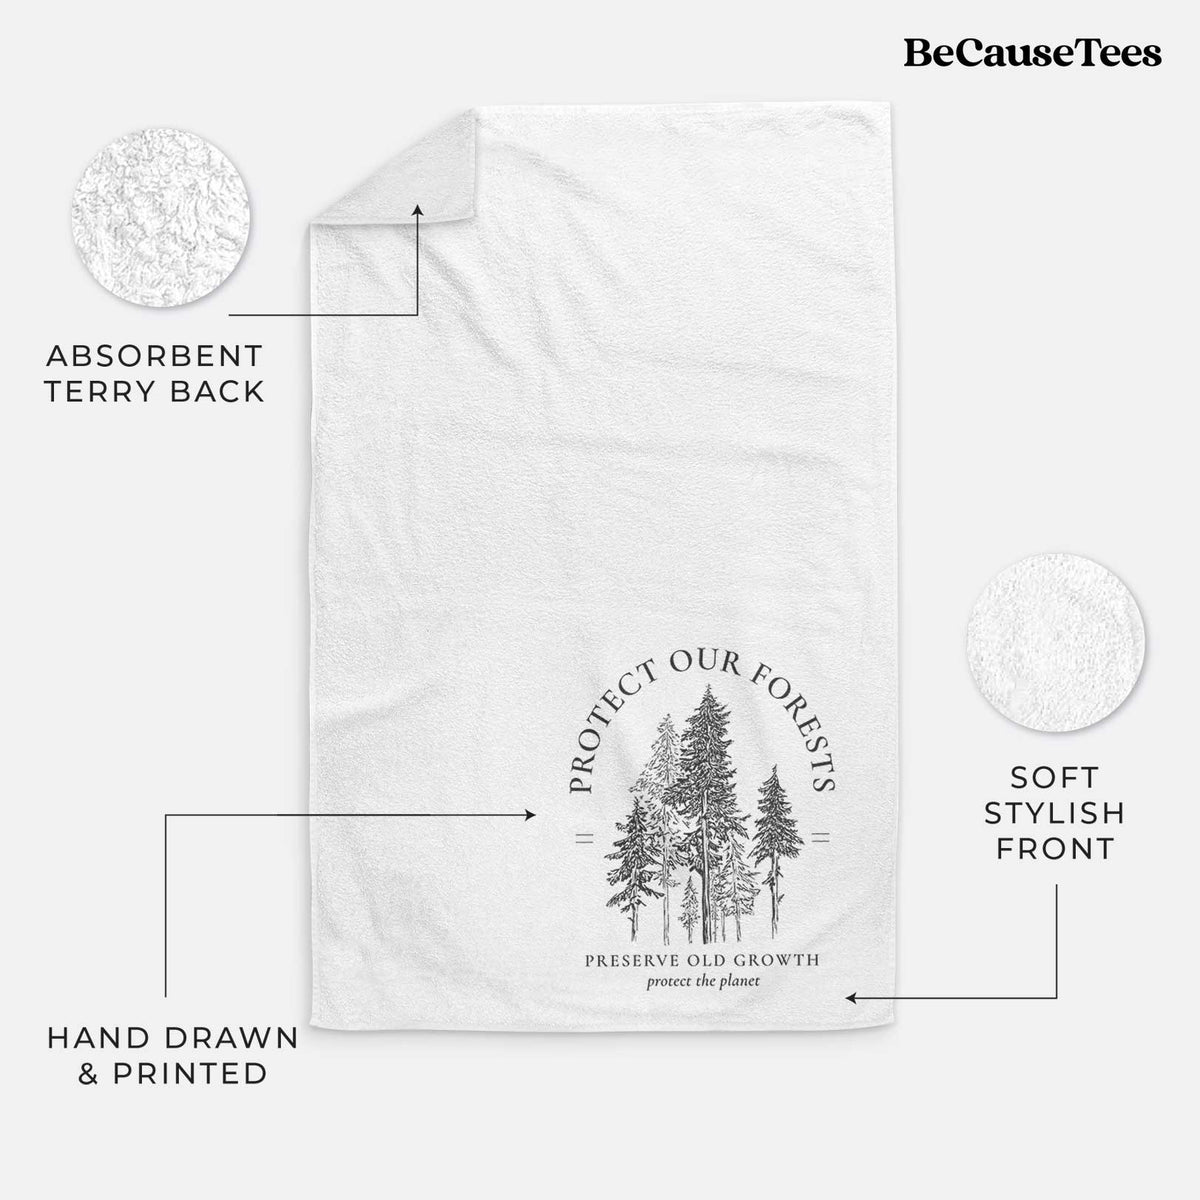 Protect our Forests - Preserve Old Growth Hand Towel